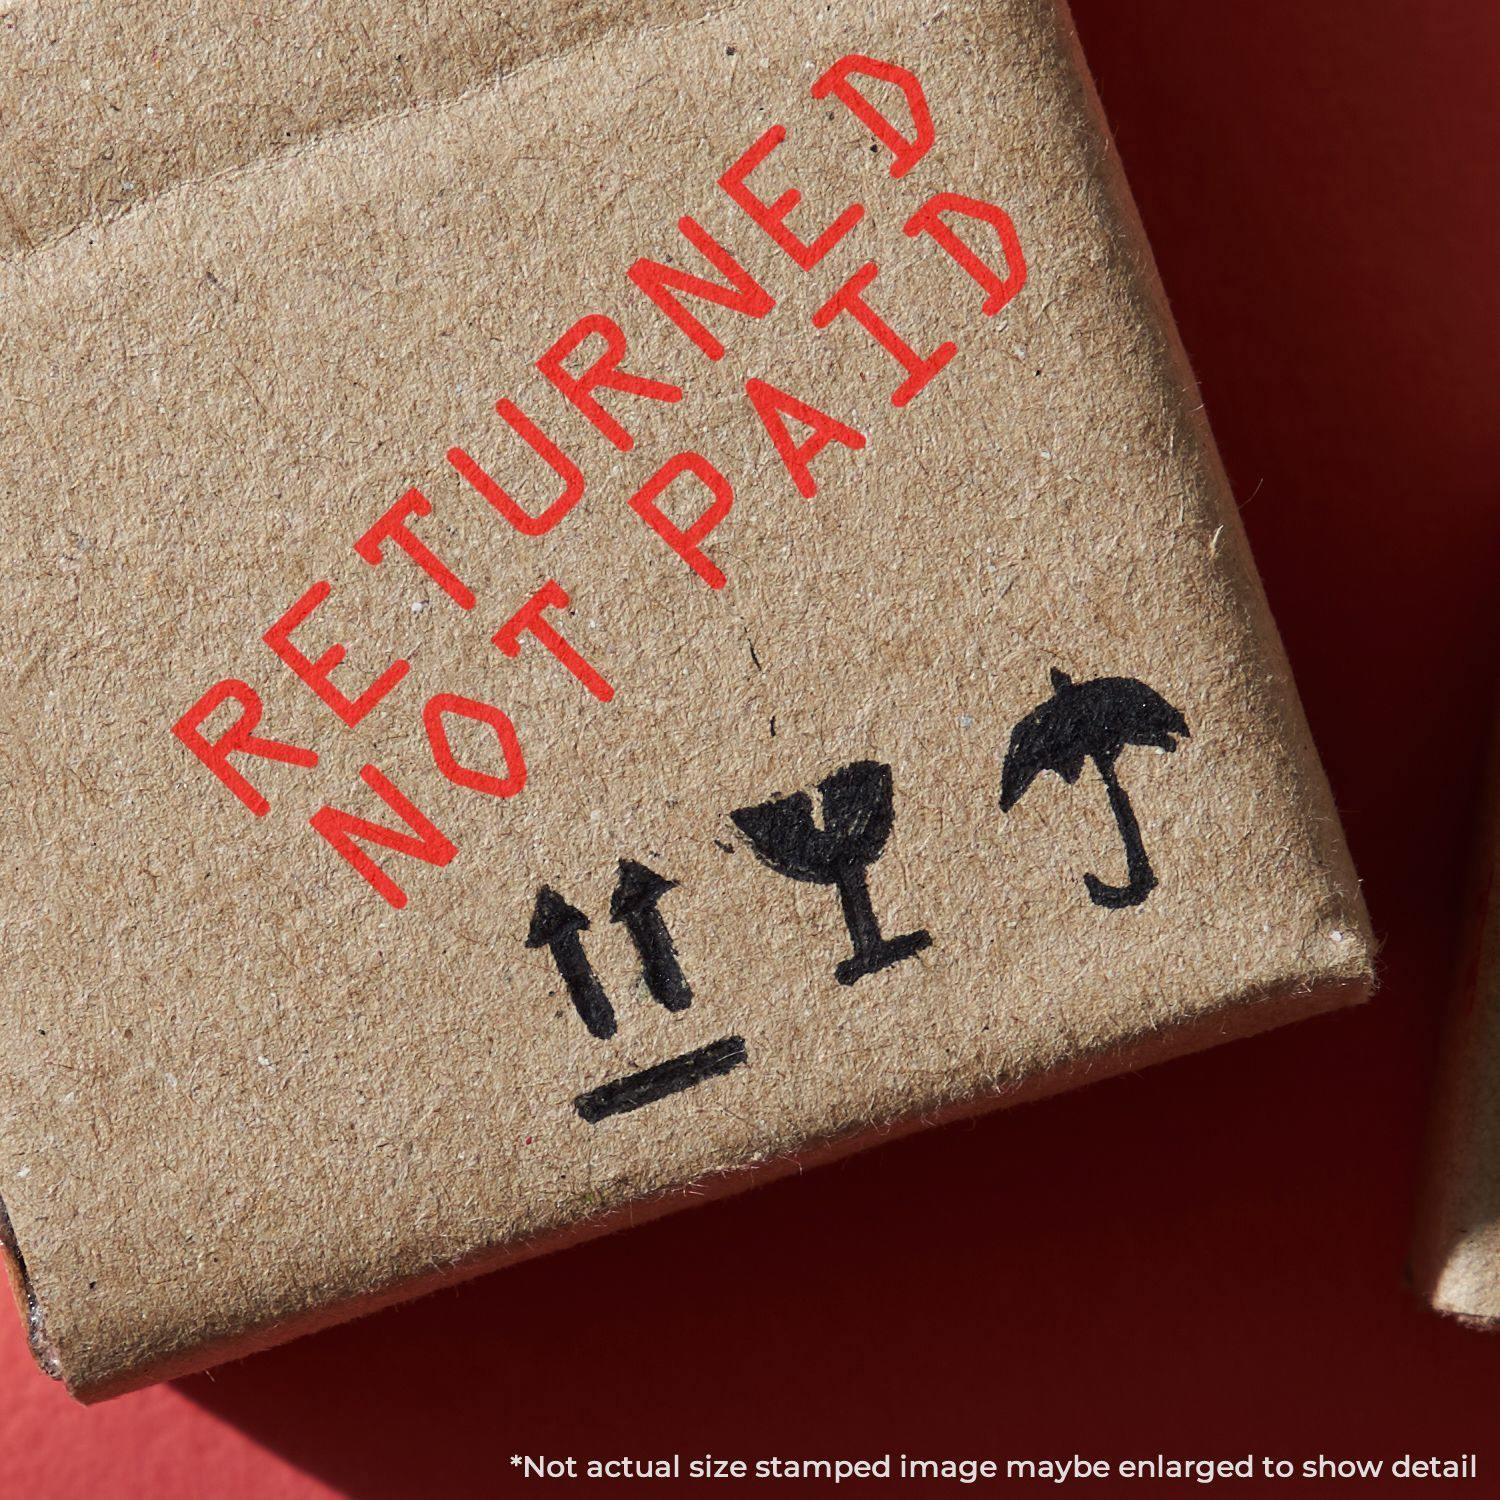 A stock office rubber stamp with a stamped image showing how the text "RETURNED NOT PAID" is displayed after stamping.